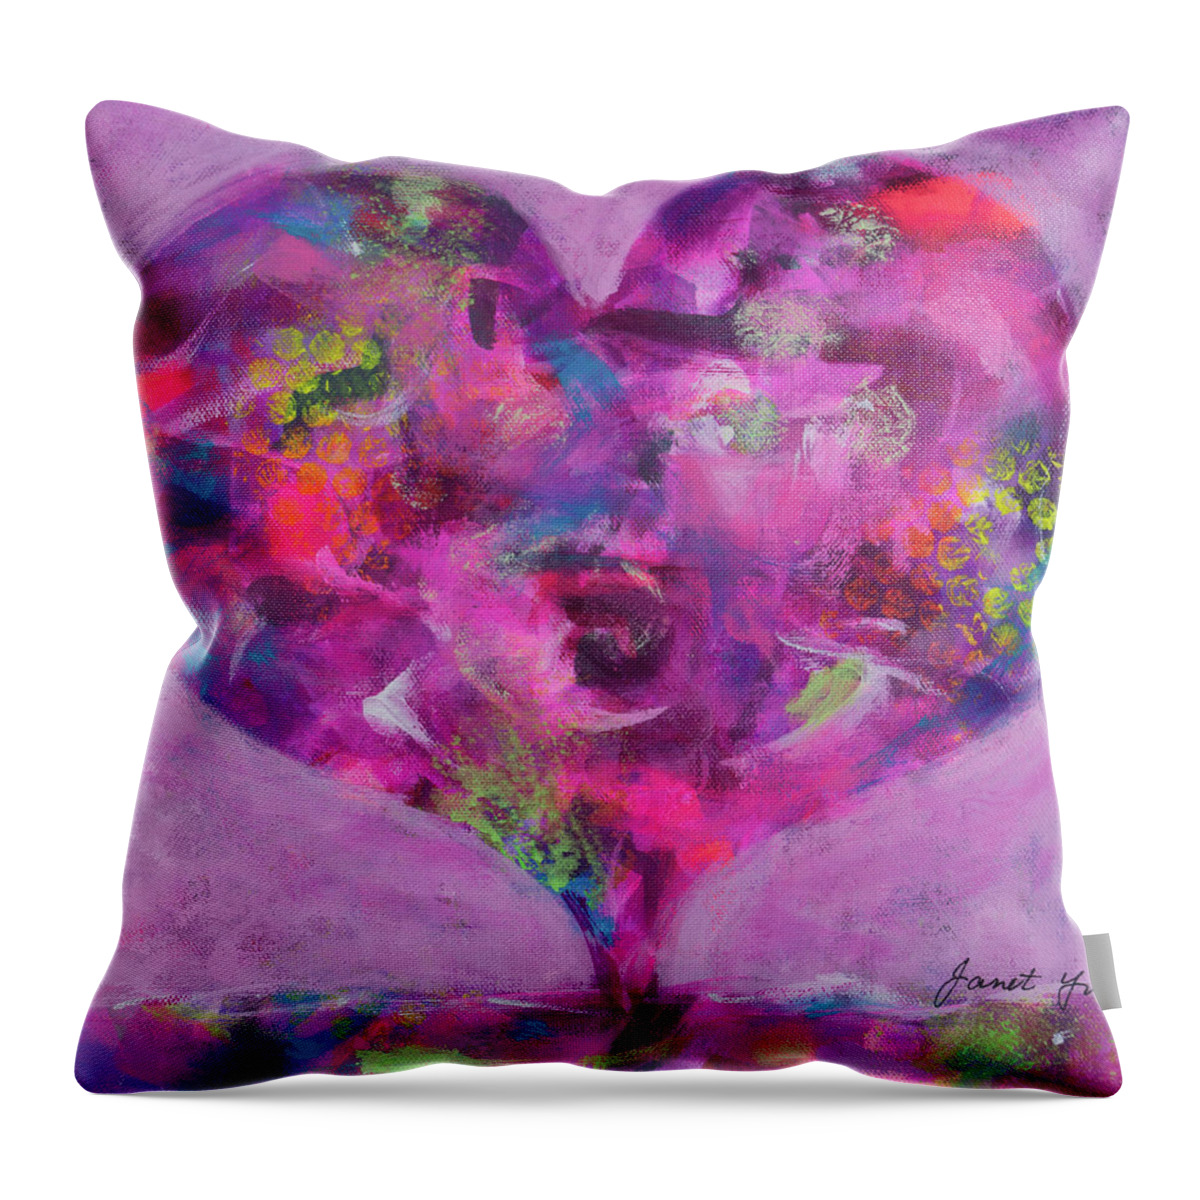 Abstract Throw Pillow featuring the painting Margenta Heart by Janet Yu